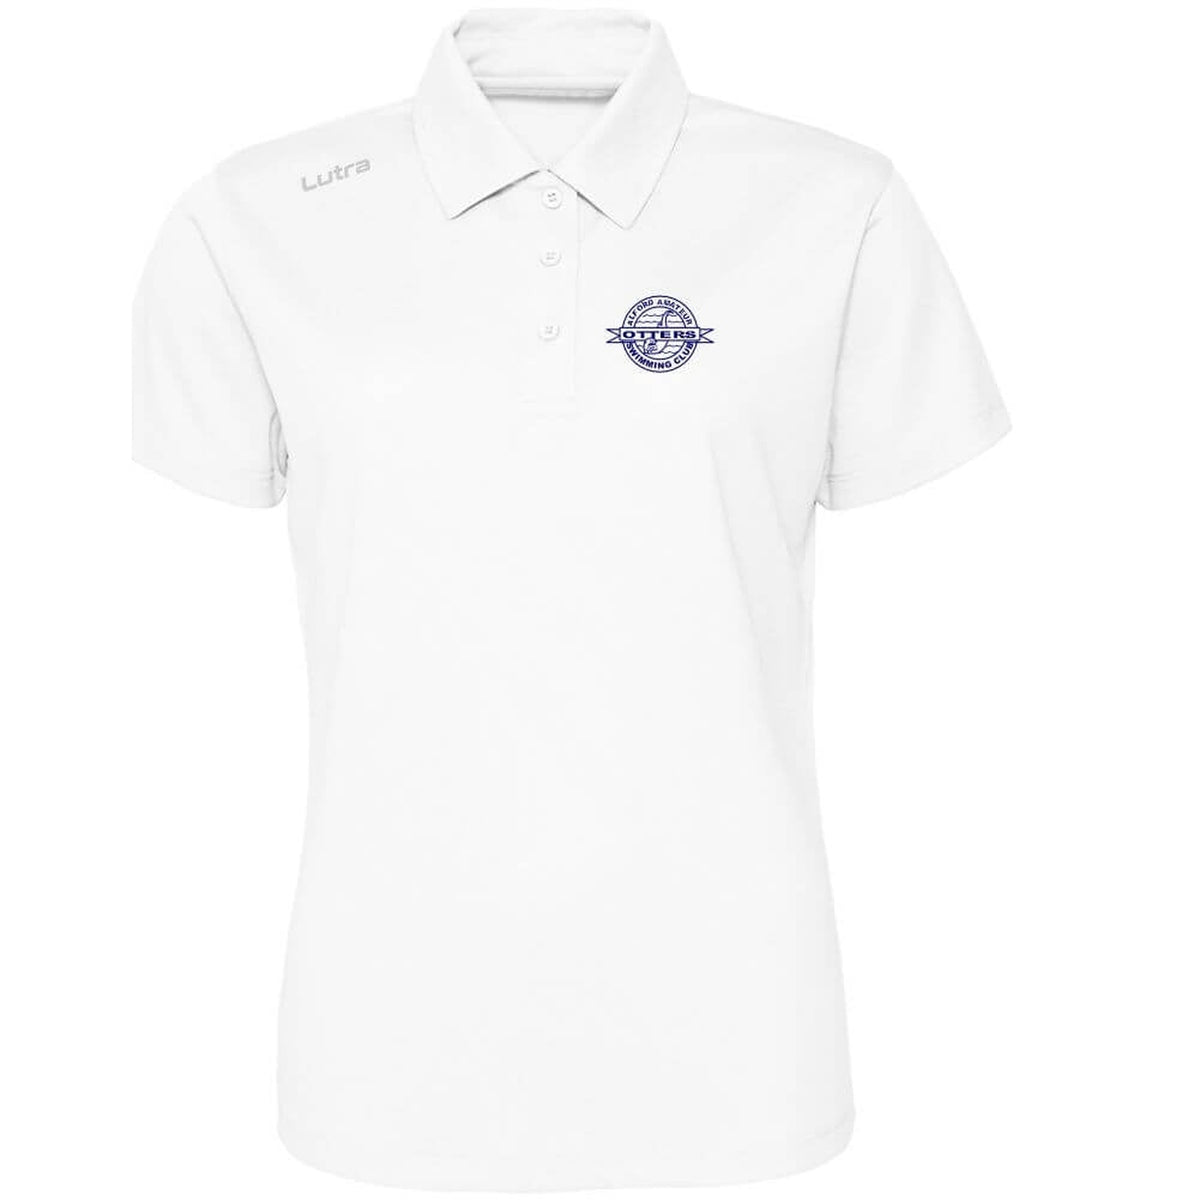 Alford Otters ASC - TECHNICAL OFFICIAL Tech Polo Ladies